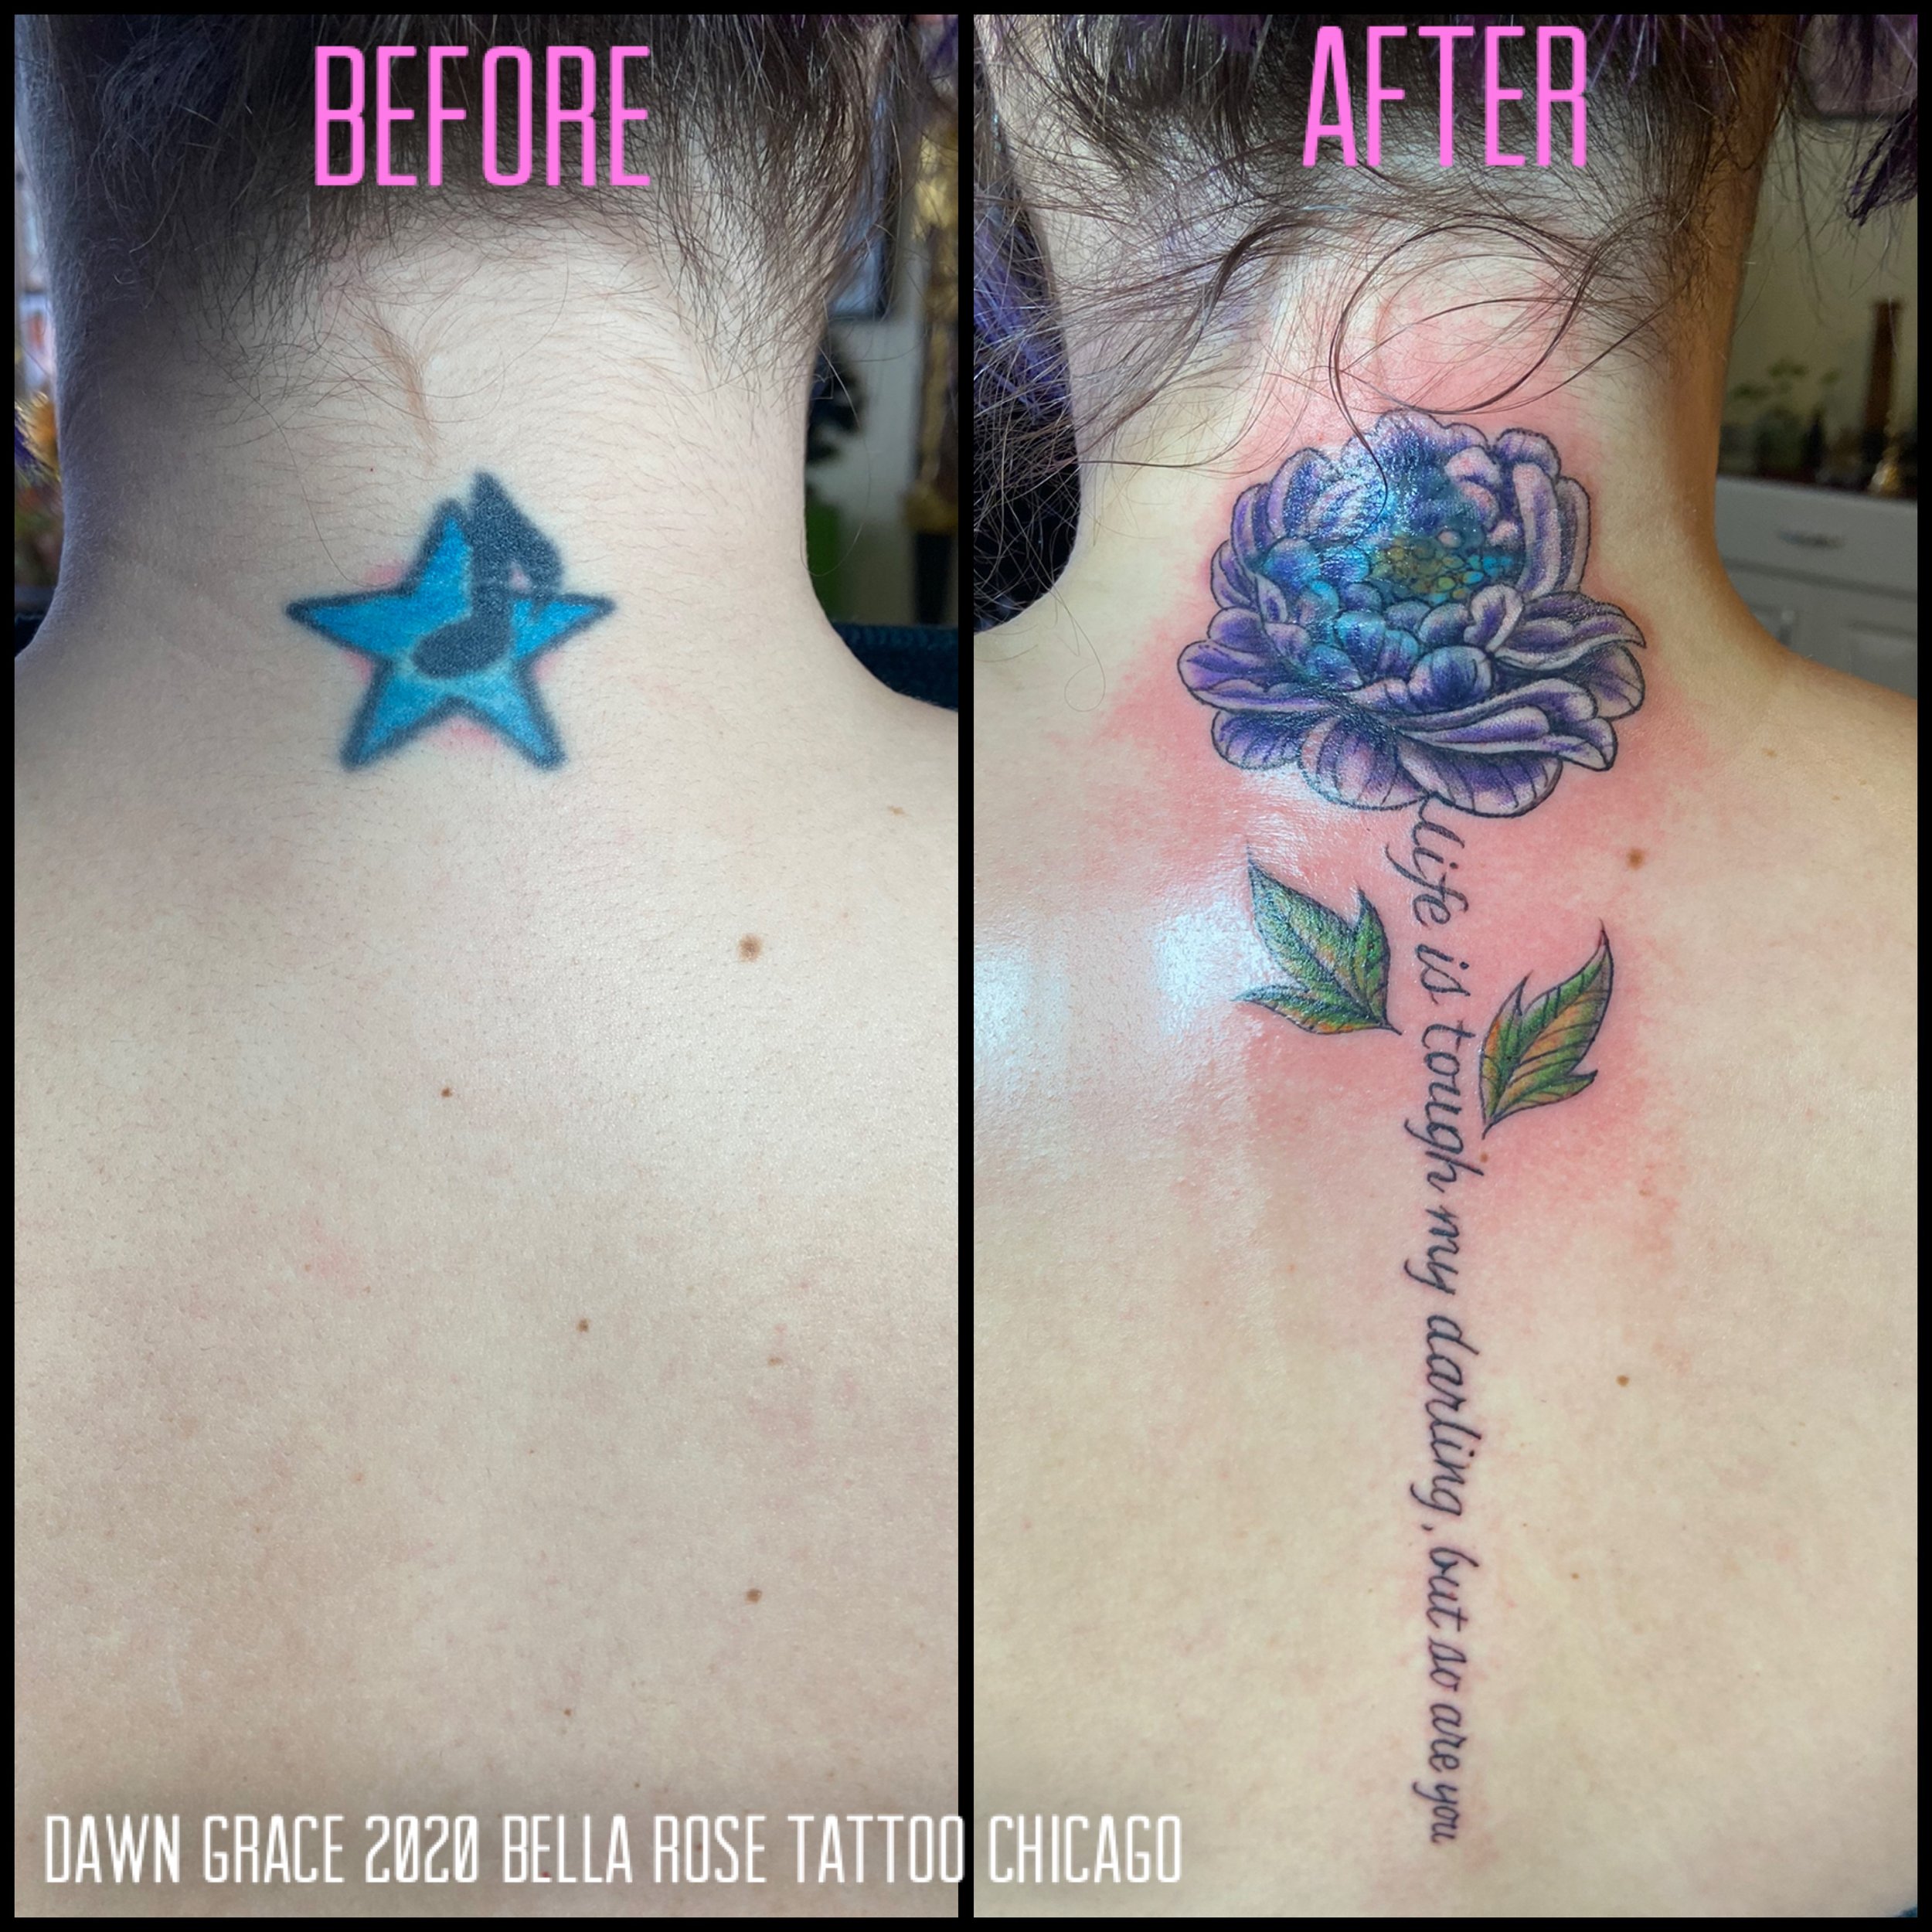 Amazing Cover-up tattoo by America's best coverup Artist Cracker Joe Swider  in New Milford, CT | Tattoo artists near me, Cover up tattoo, Best cover up  tattoos